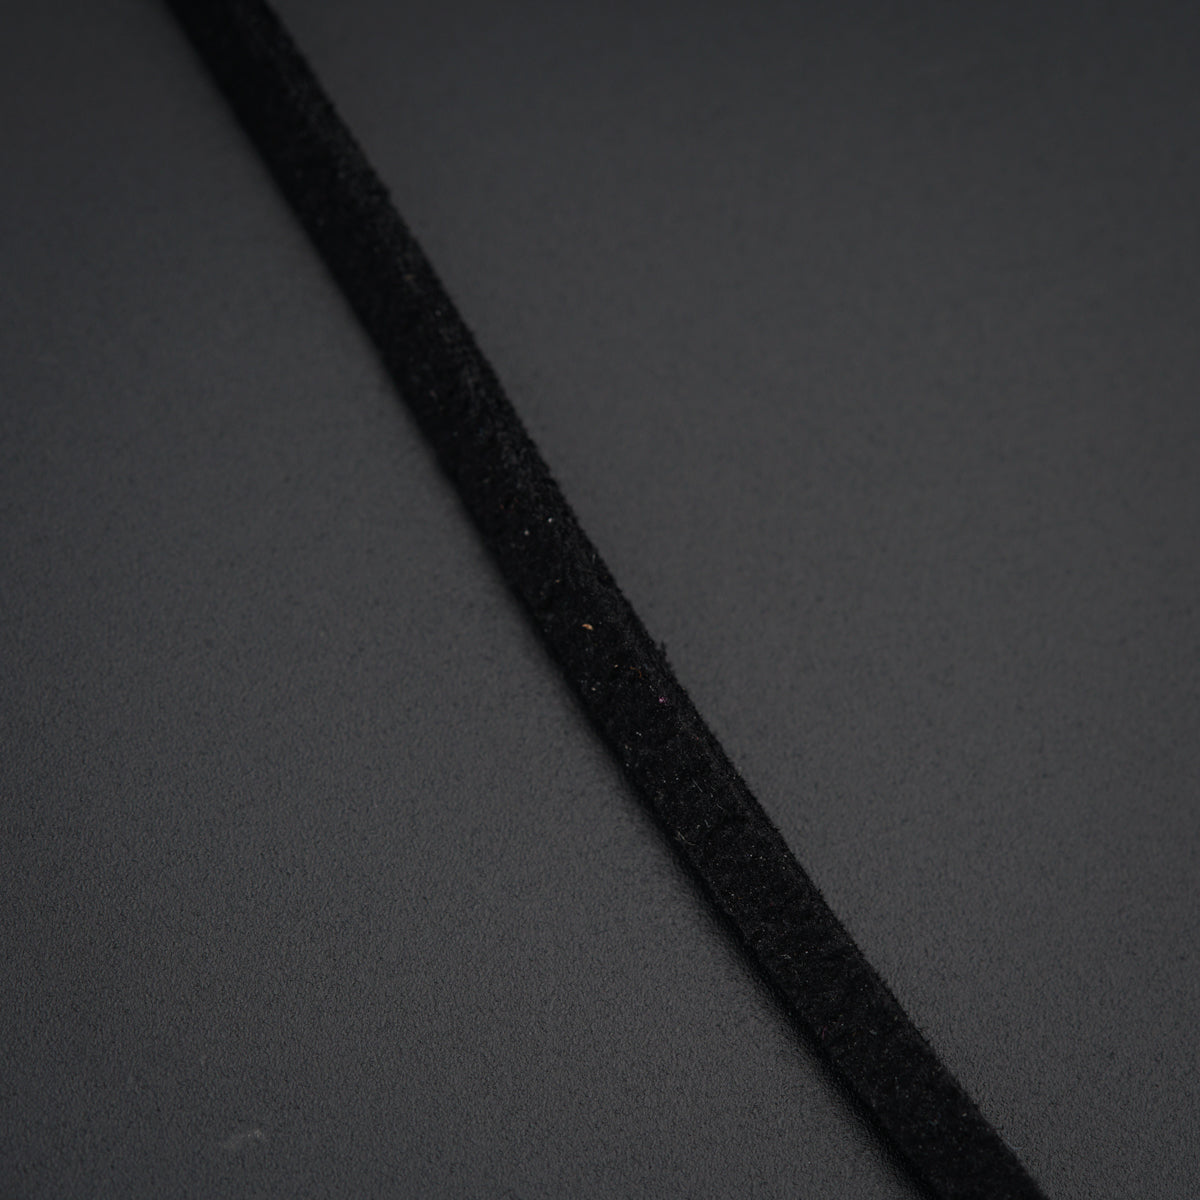 a close up of a black cord on a table